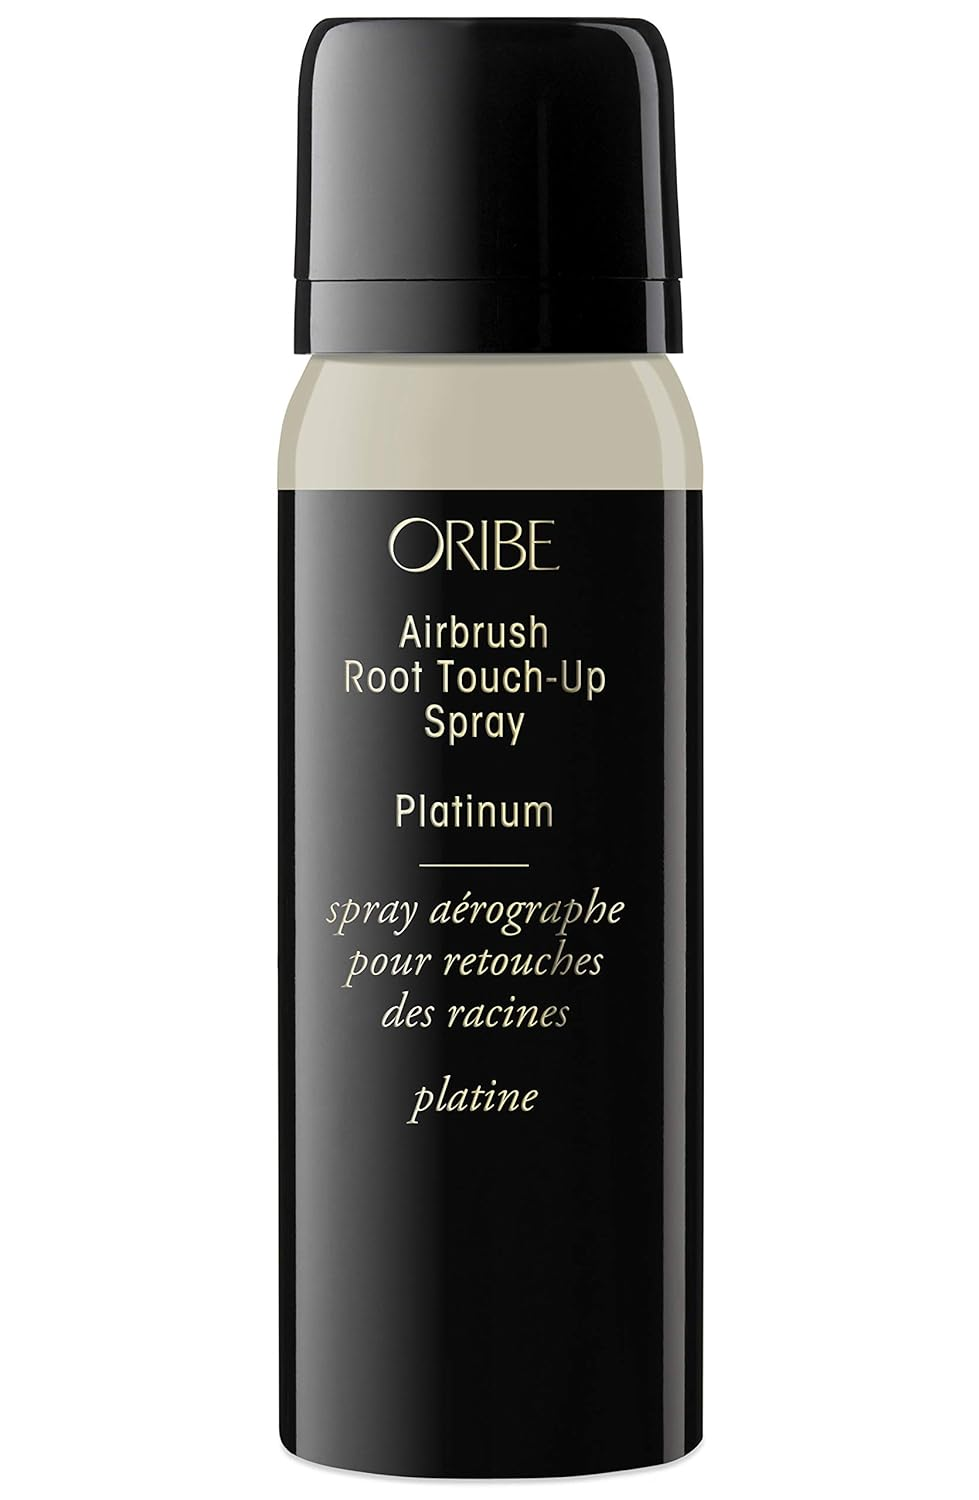 Product image of Oribe Root Touch-Up Spray hair makeup